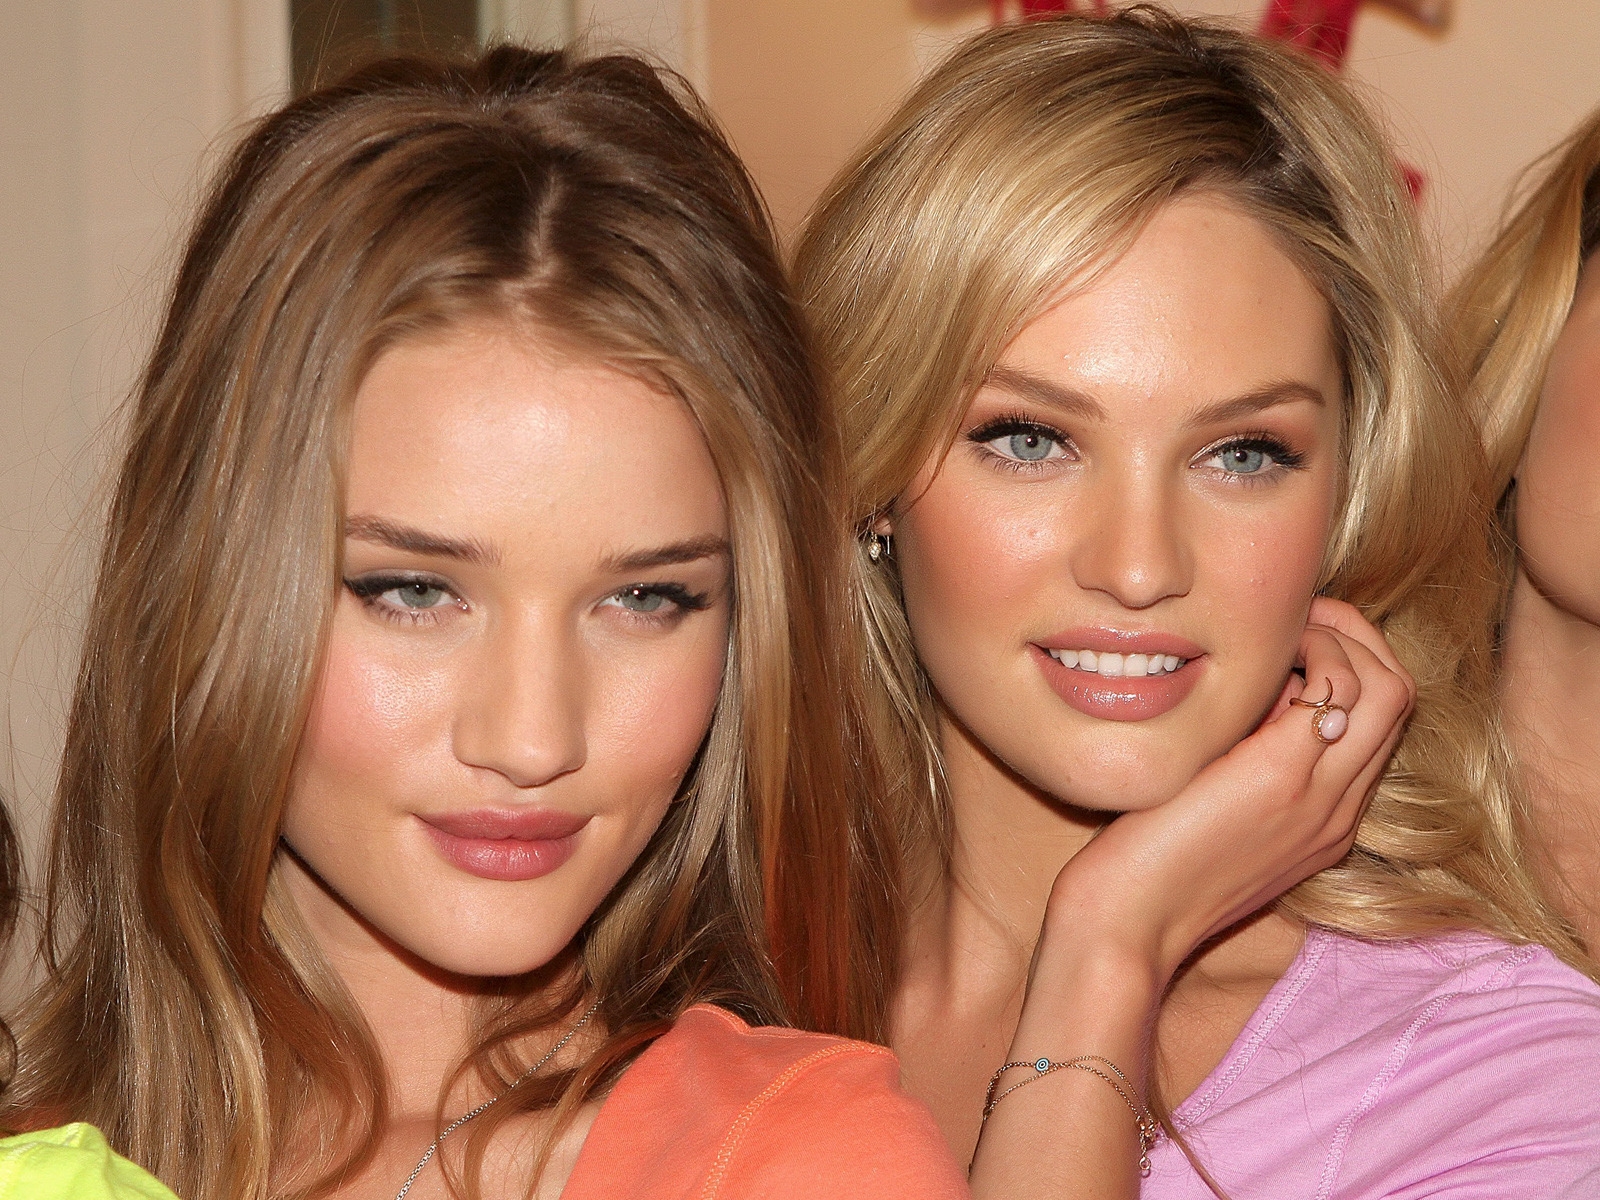 Rosie and Candice for 1600 x 1200 resolution